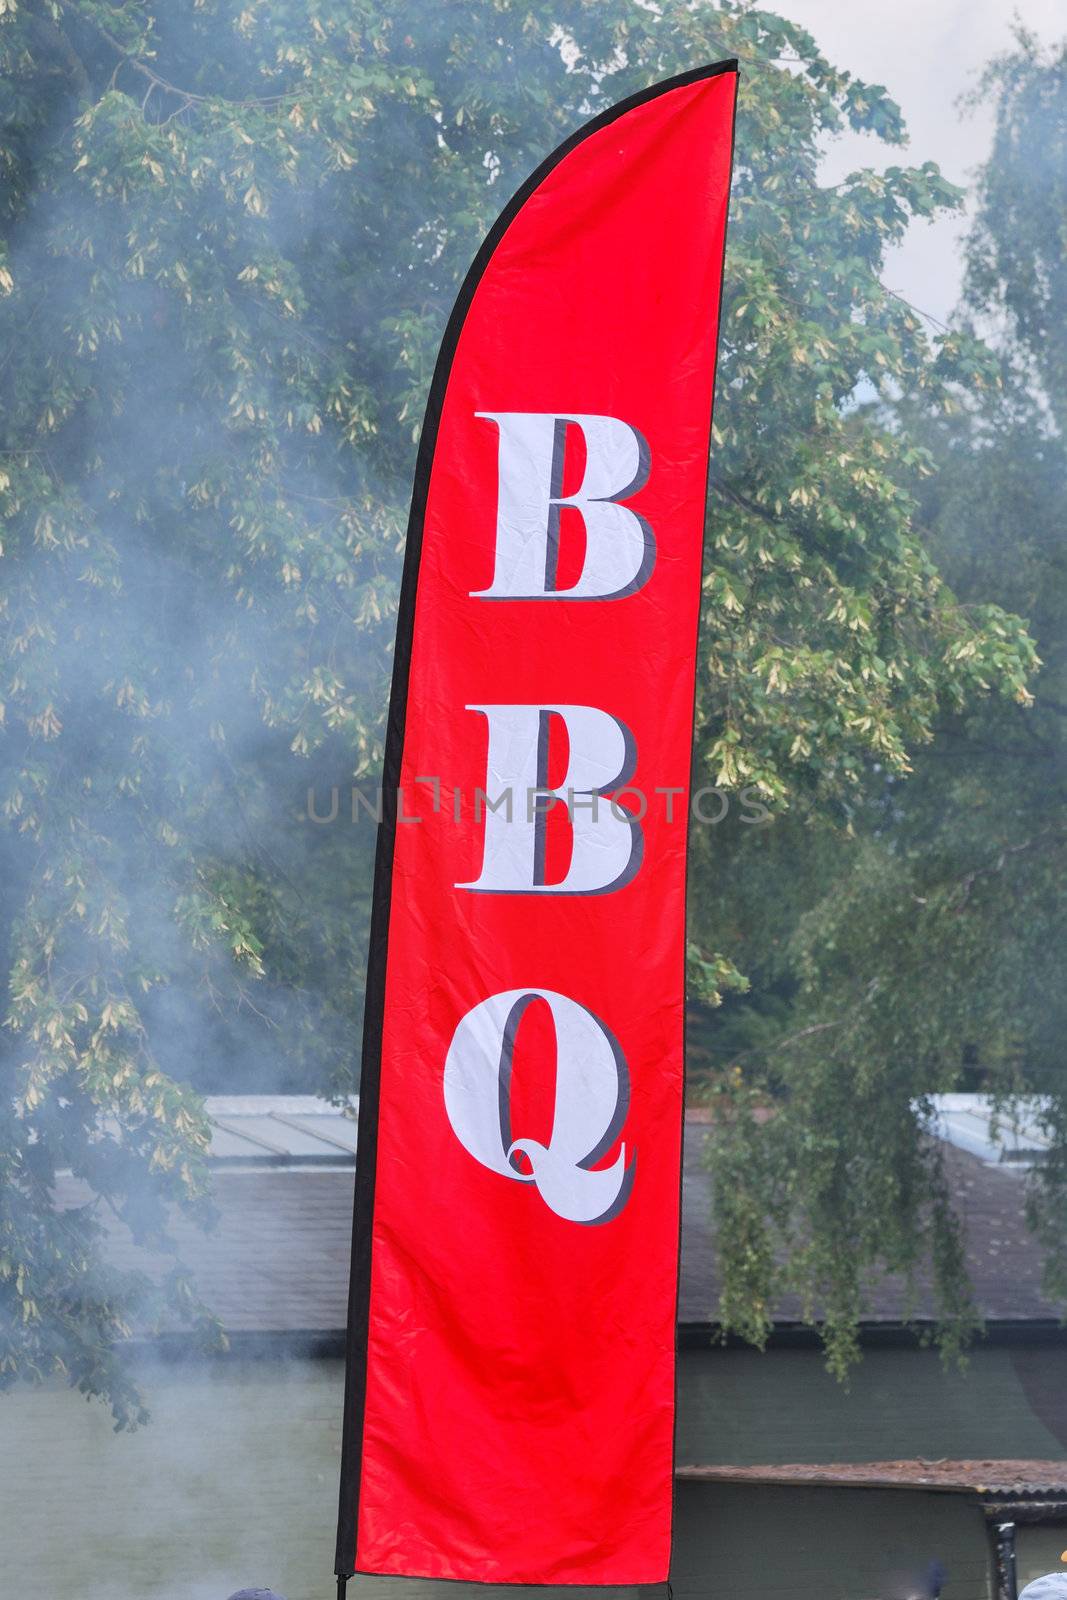 BBQ sign by pauws99